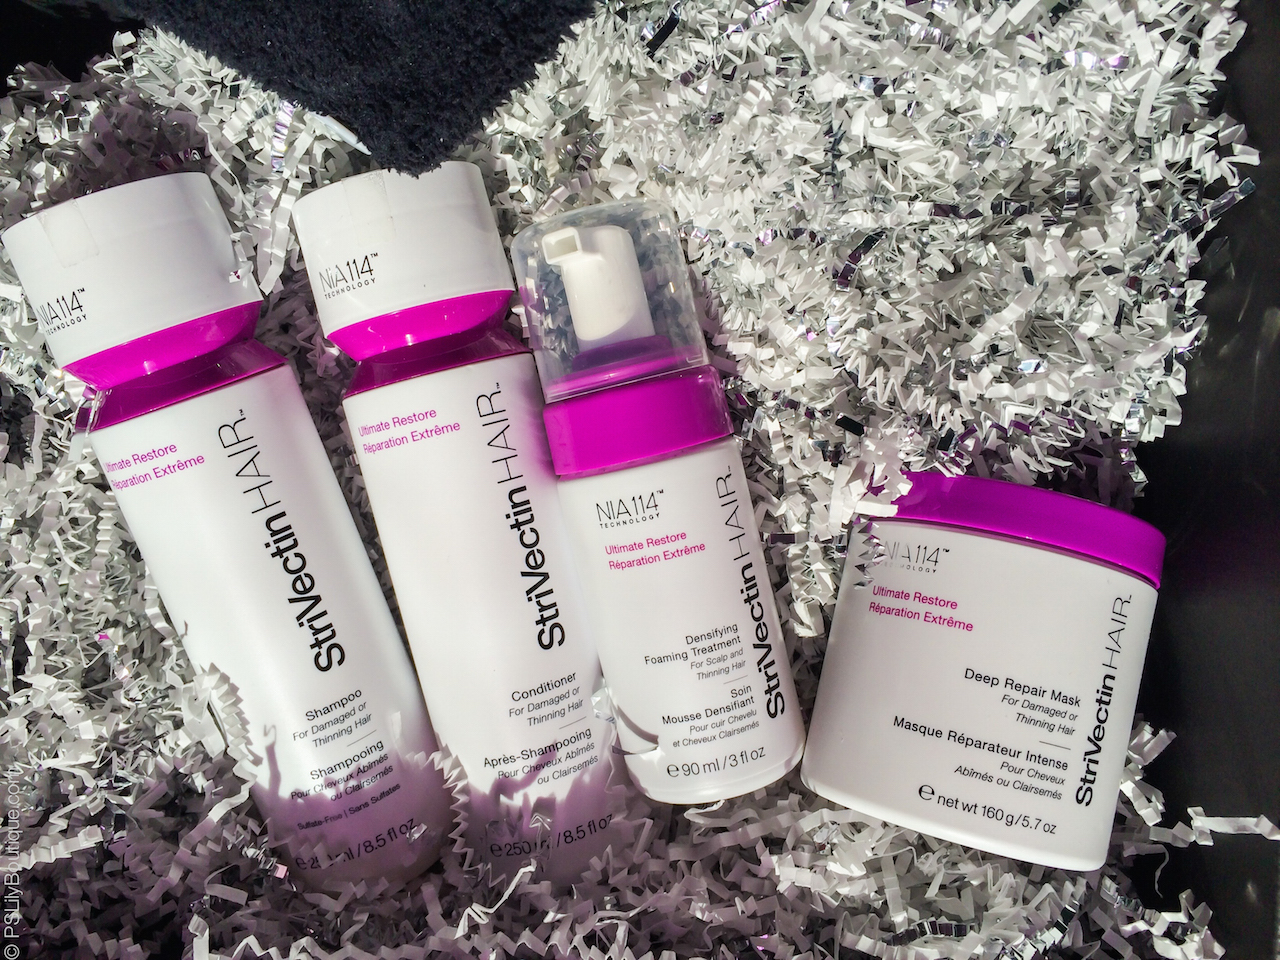 instagram-pslilyboutique-los-angeles-fashion-blogger-strivectin-restore-ultimate-hair-loss-review-beauty-best-fashion-bloggers-10-10-16